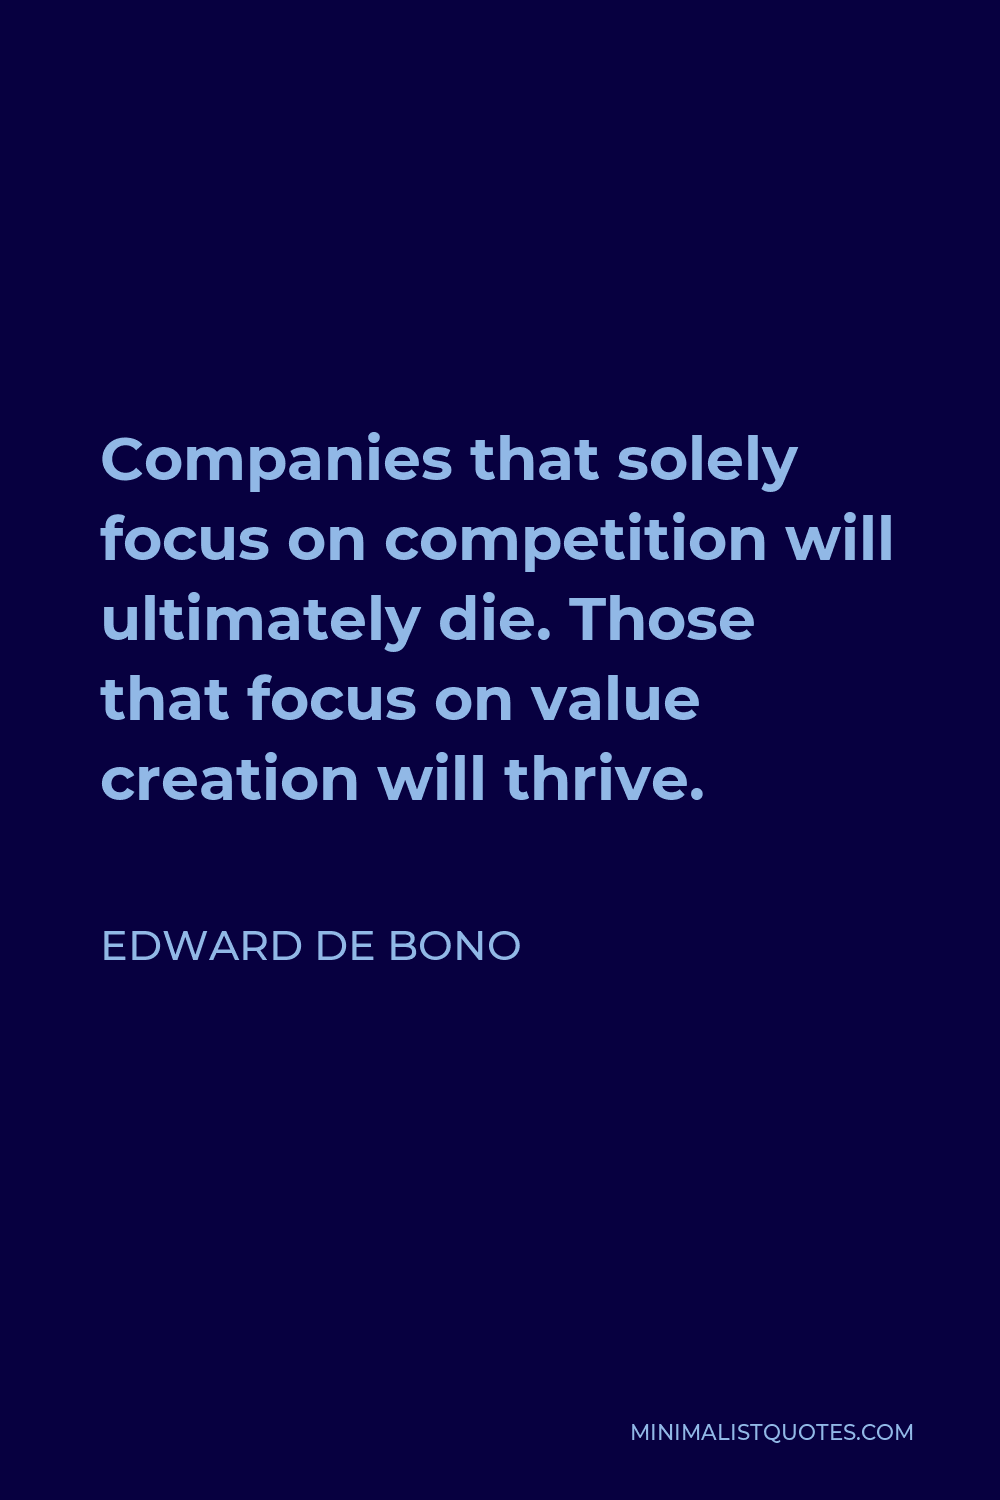 Edward de Bono Quote - Companies that solely focus on competition will ultimately die. Those that focus on value creation will thrive.